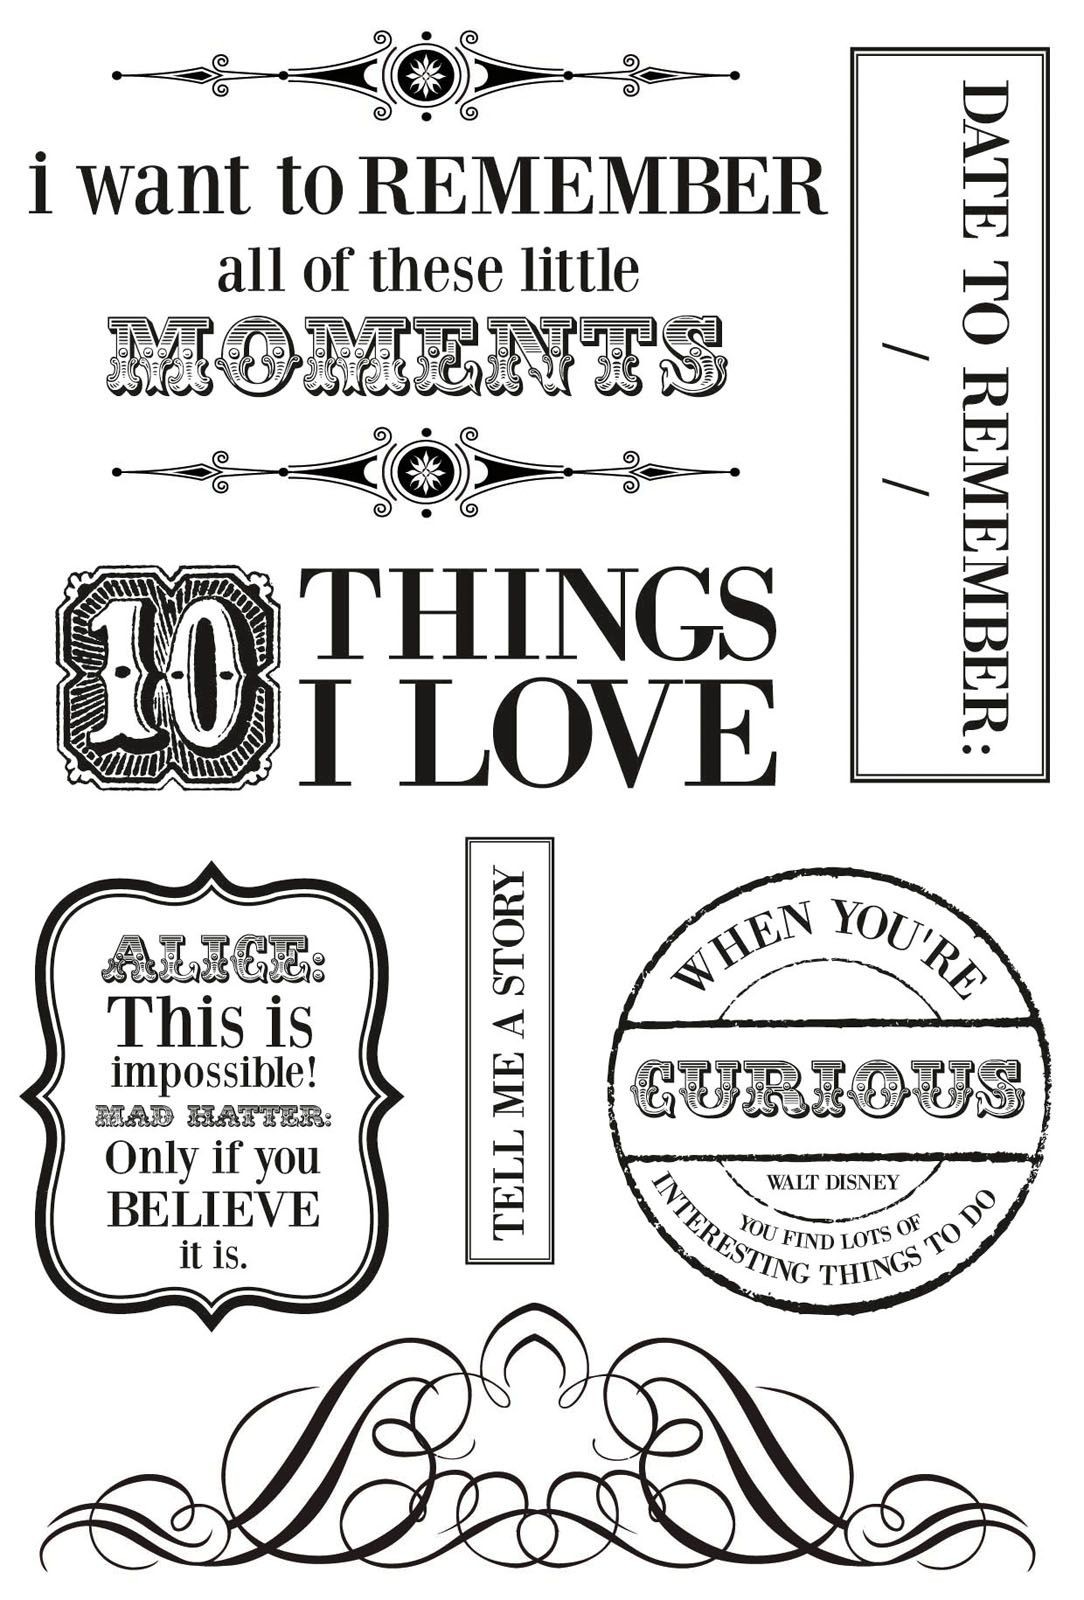  Silikonstempel Clear Stamp The Looking Glass transparent 155x105mm